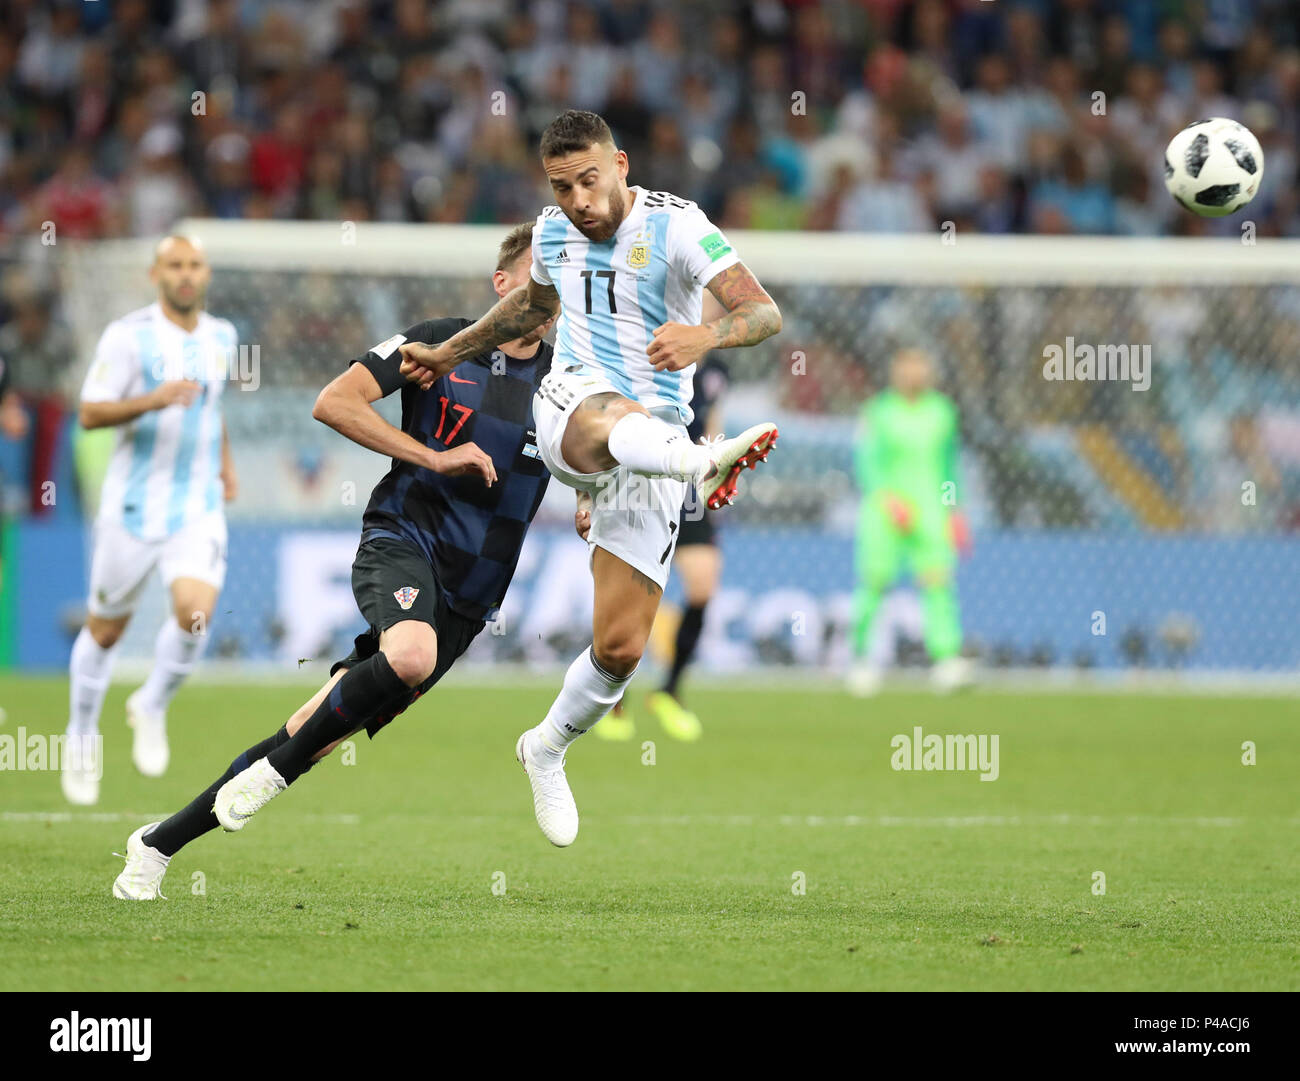 Nizhny Novgorod, Russia. 21st June, 2018. Nicolas Otamendi (front) of Argentina competes during the 2018 FIFA World Cup Group D match between Argentina and Croatia in Nizhny Novgorod, Russia, June 21, 2018. Credit: Yang Lei/Xinhua/Alamy Live News Stock Photo